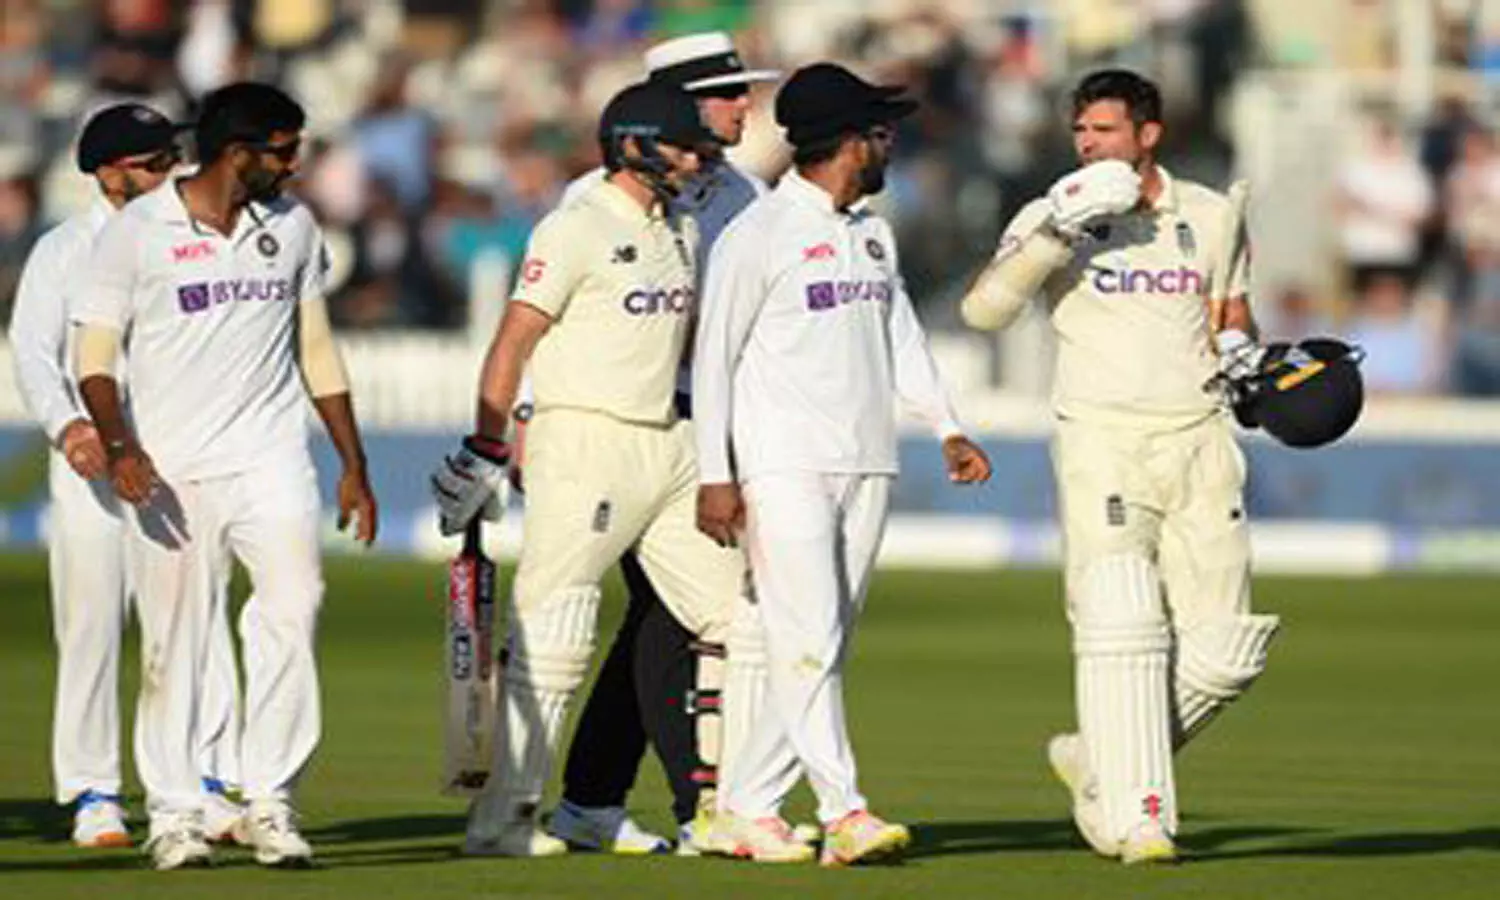 India vs England 2nd Test, Day 4: Second innings battle begins at Lords